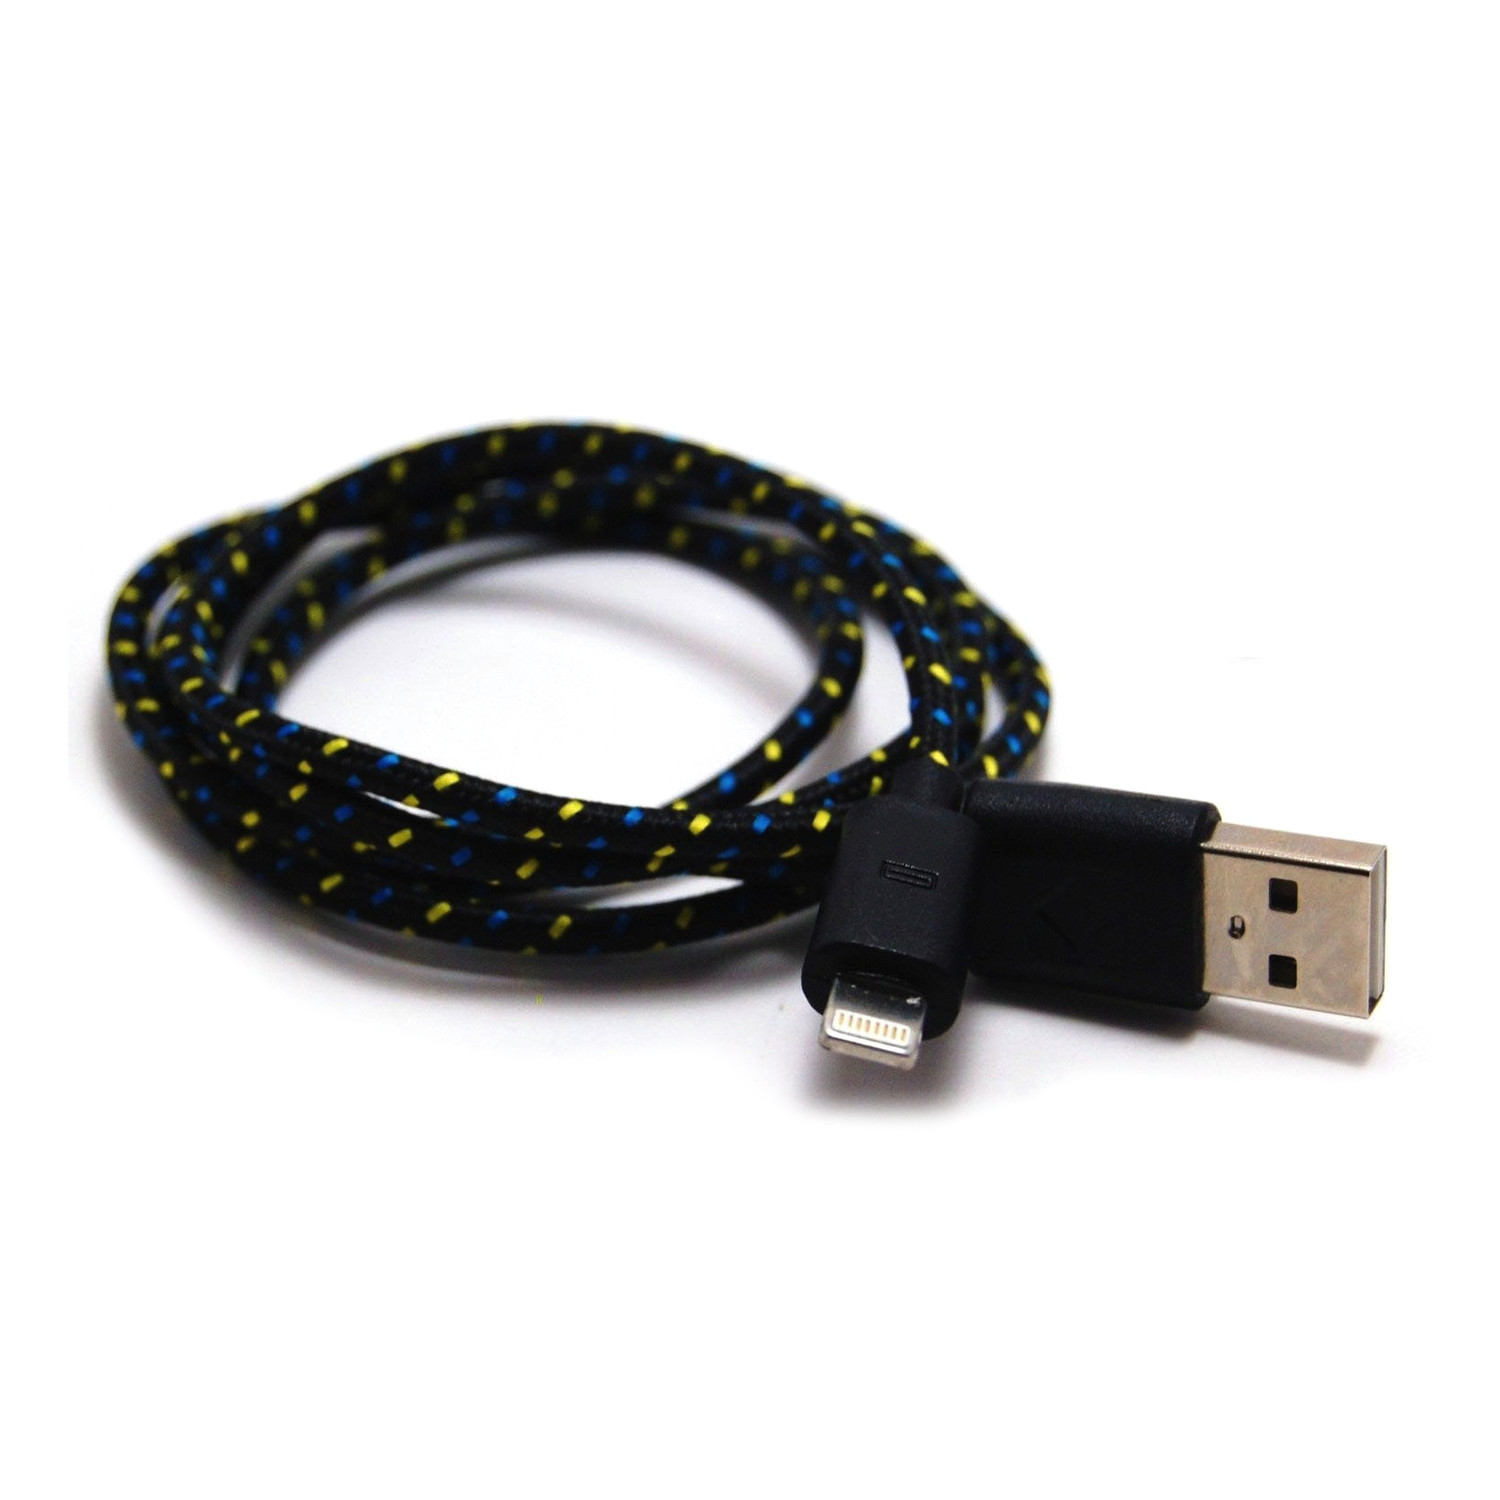 bungee cord charger